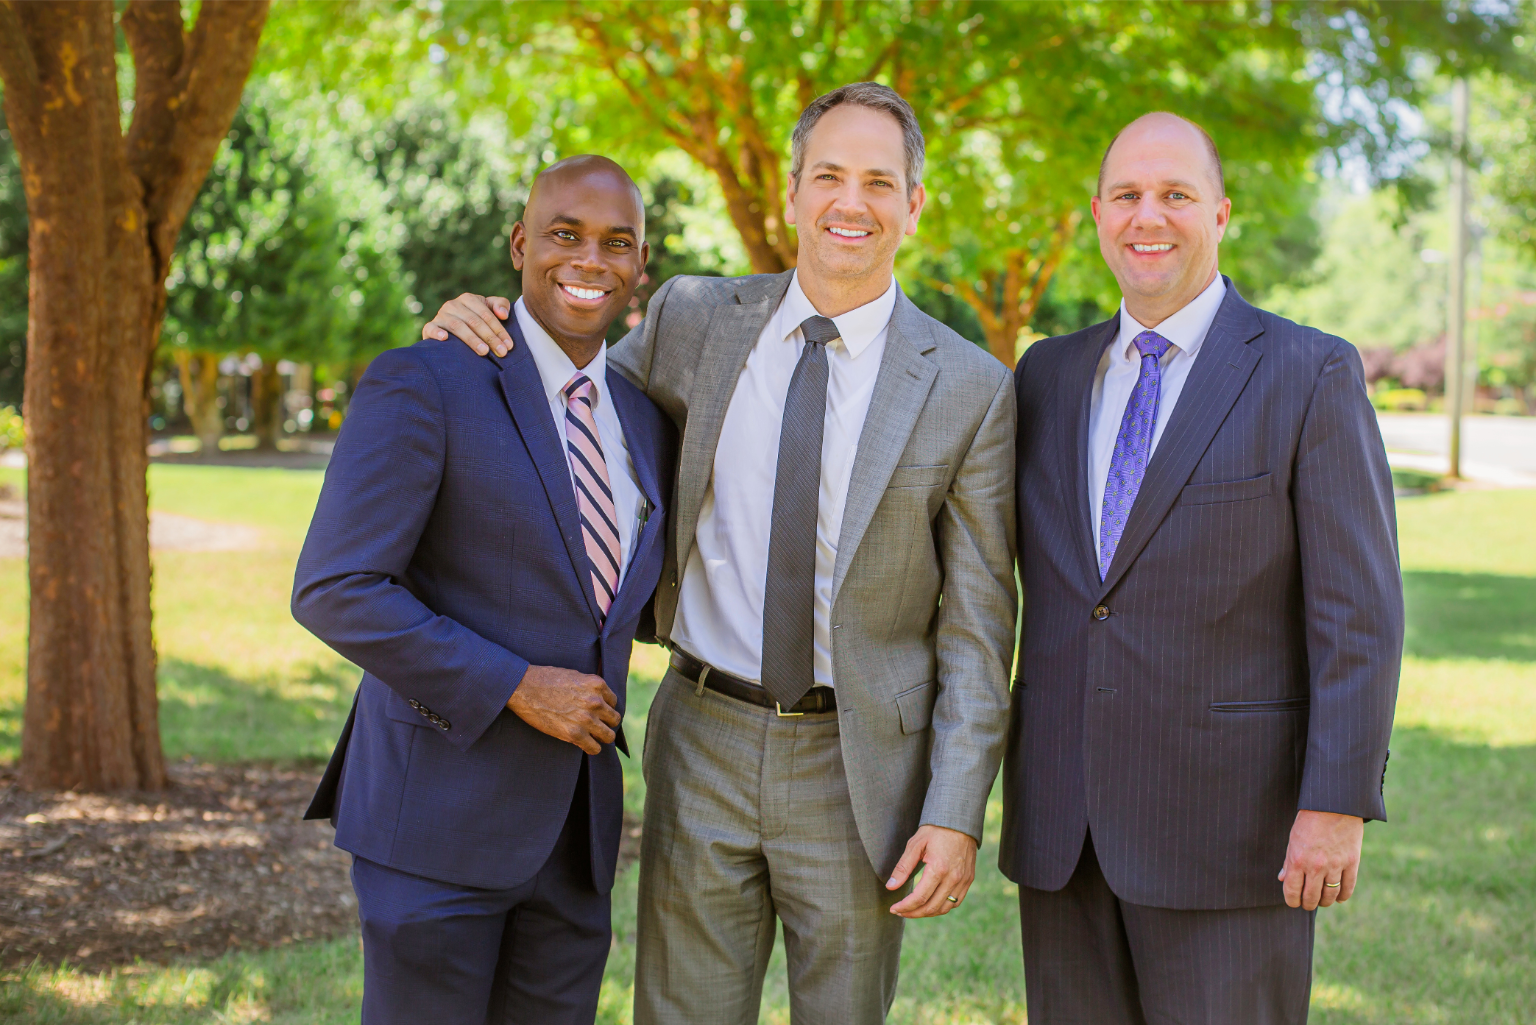 The Gastonia, NC area leaders for The Church of Jesus Christ of Latter-day Saints: President O.J. Sheppard, President Eddie Norton, and President Matthew Cox